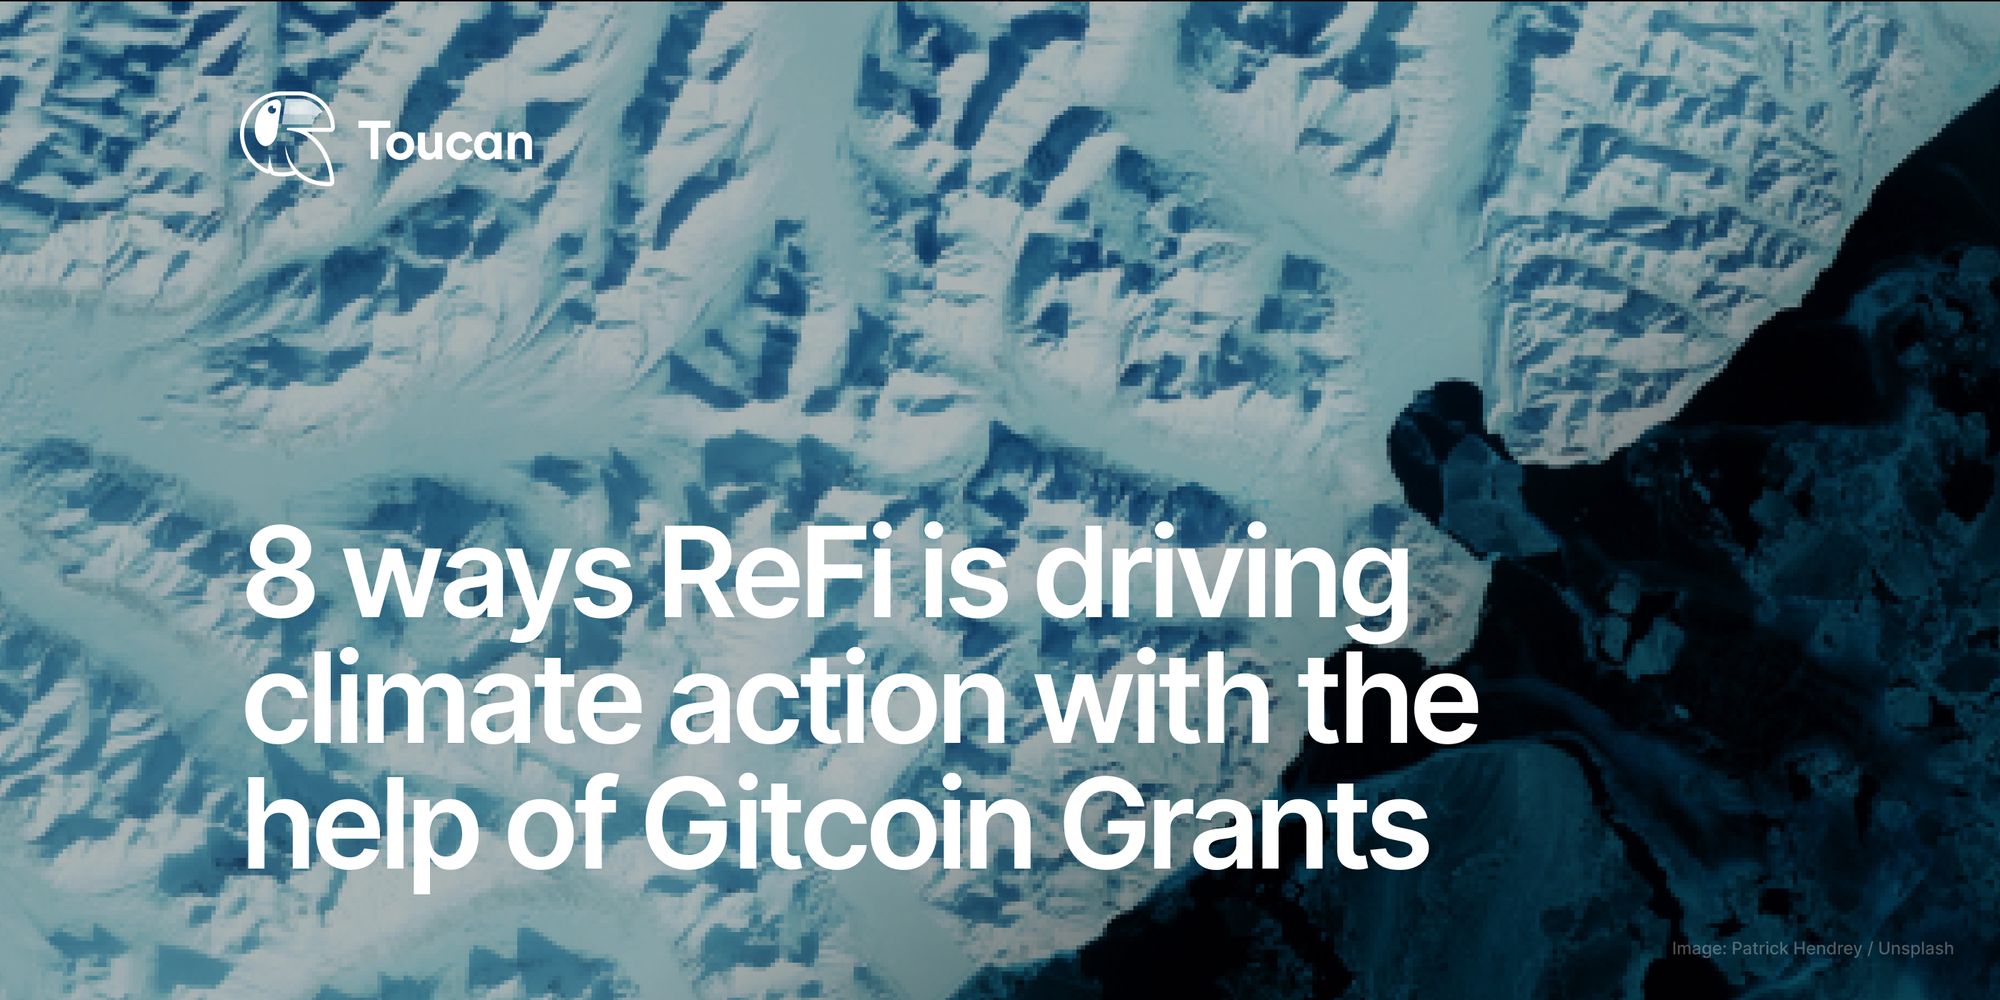 8 ways ReFi is driving climate action with the help of Gitcoin Grants 🍃